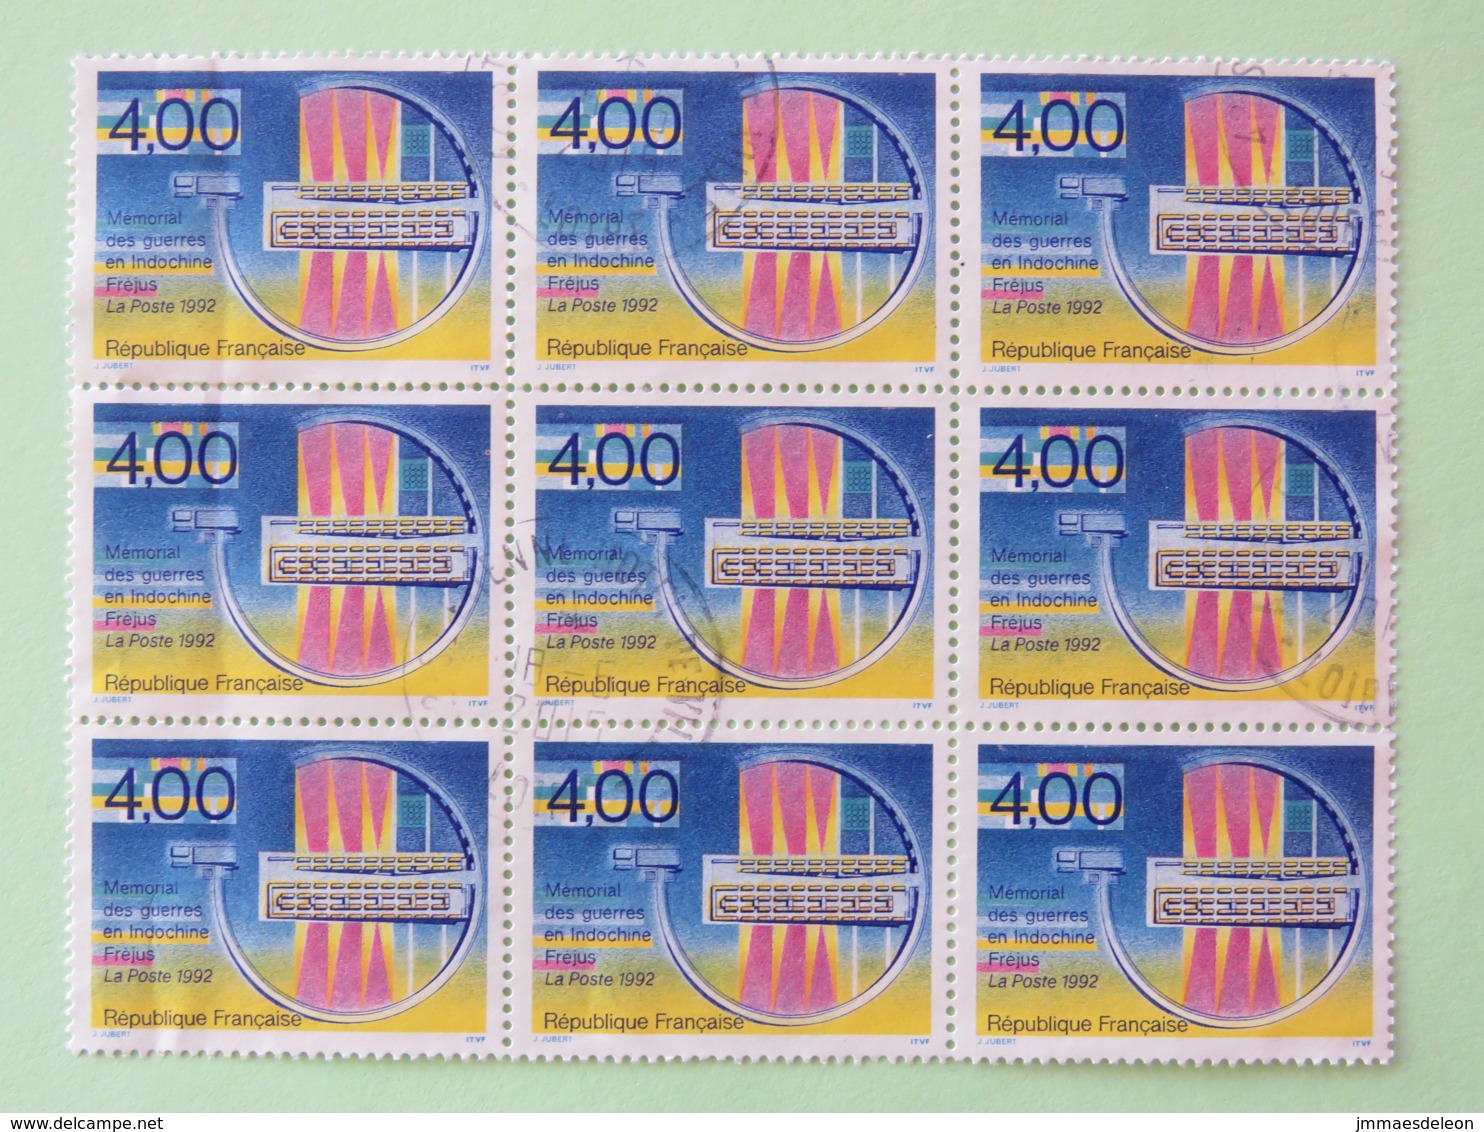 France - Used Stamps From Cover 2018 To Nicaragua - Indochina War Memorial In Frejus - Gebruikt